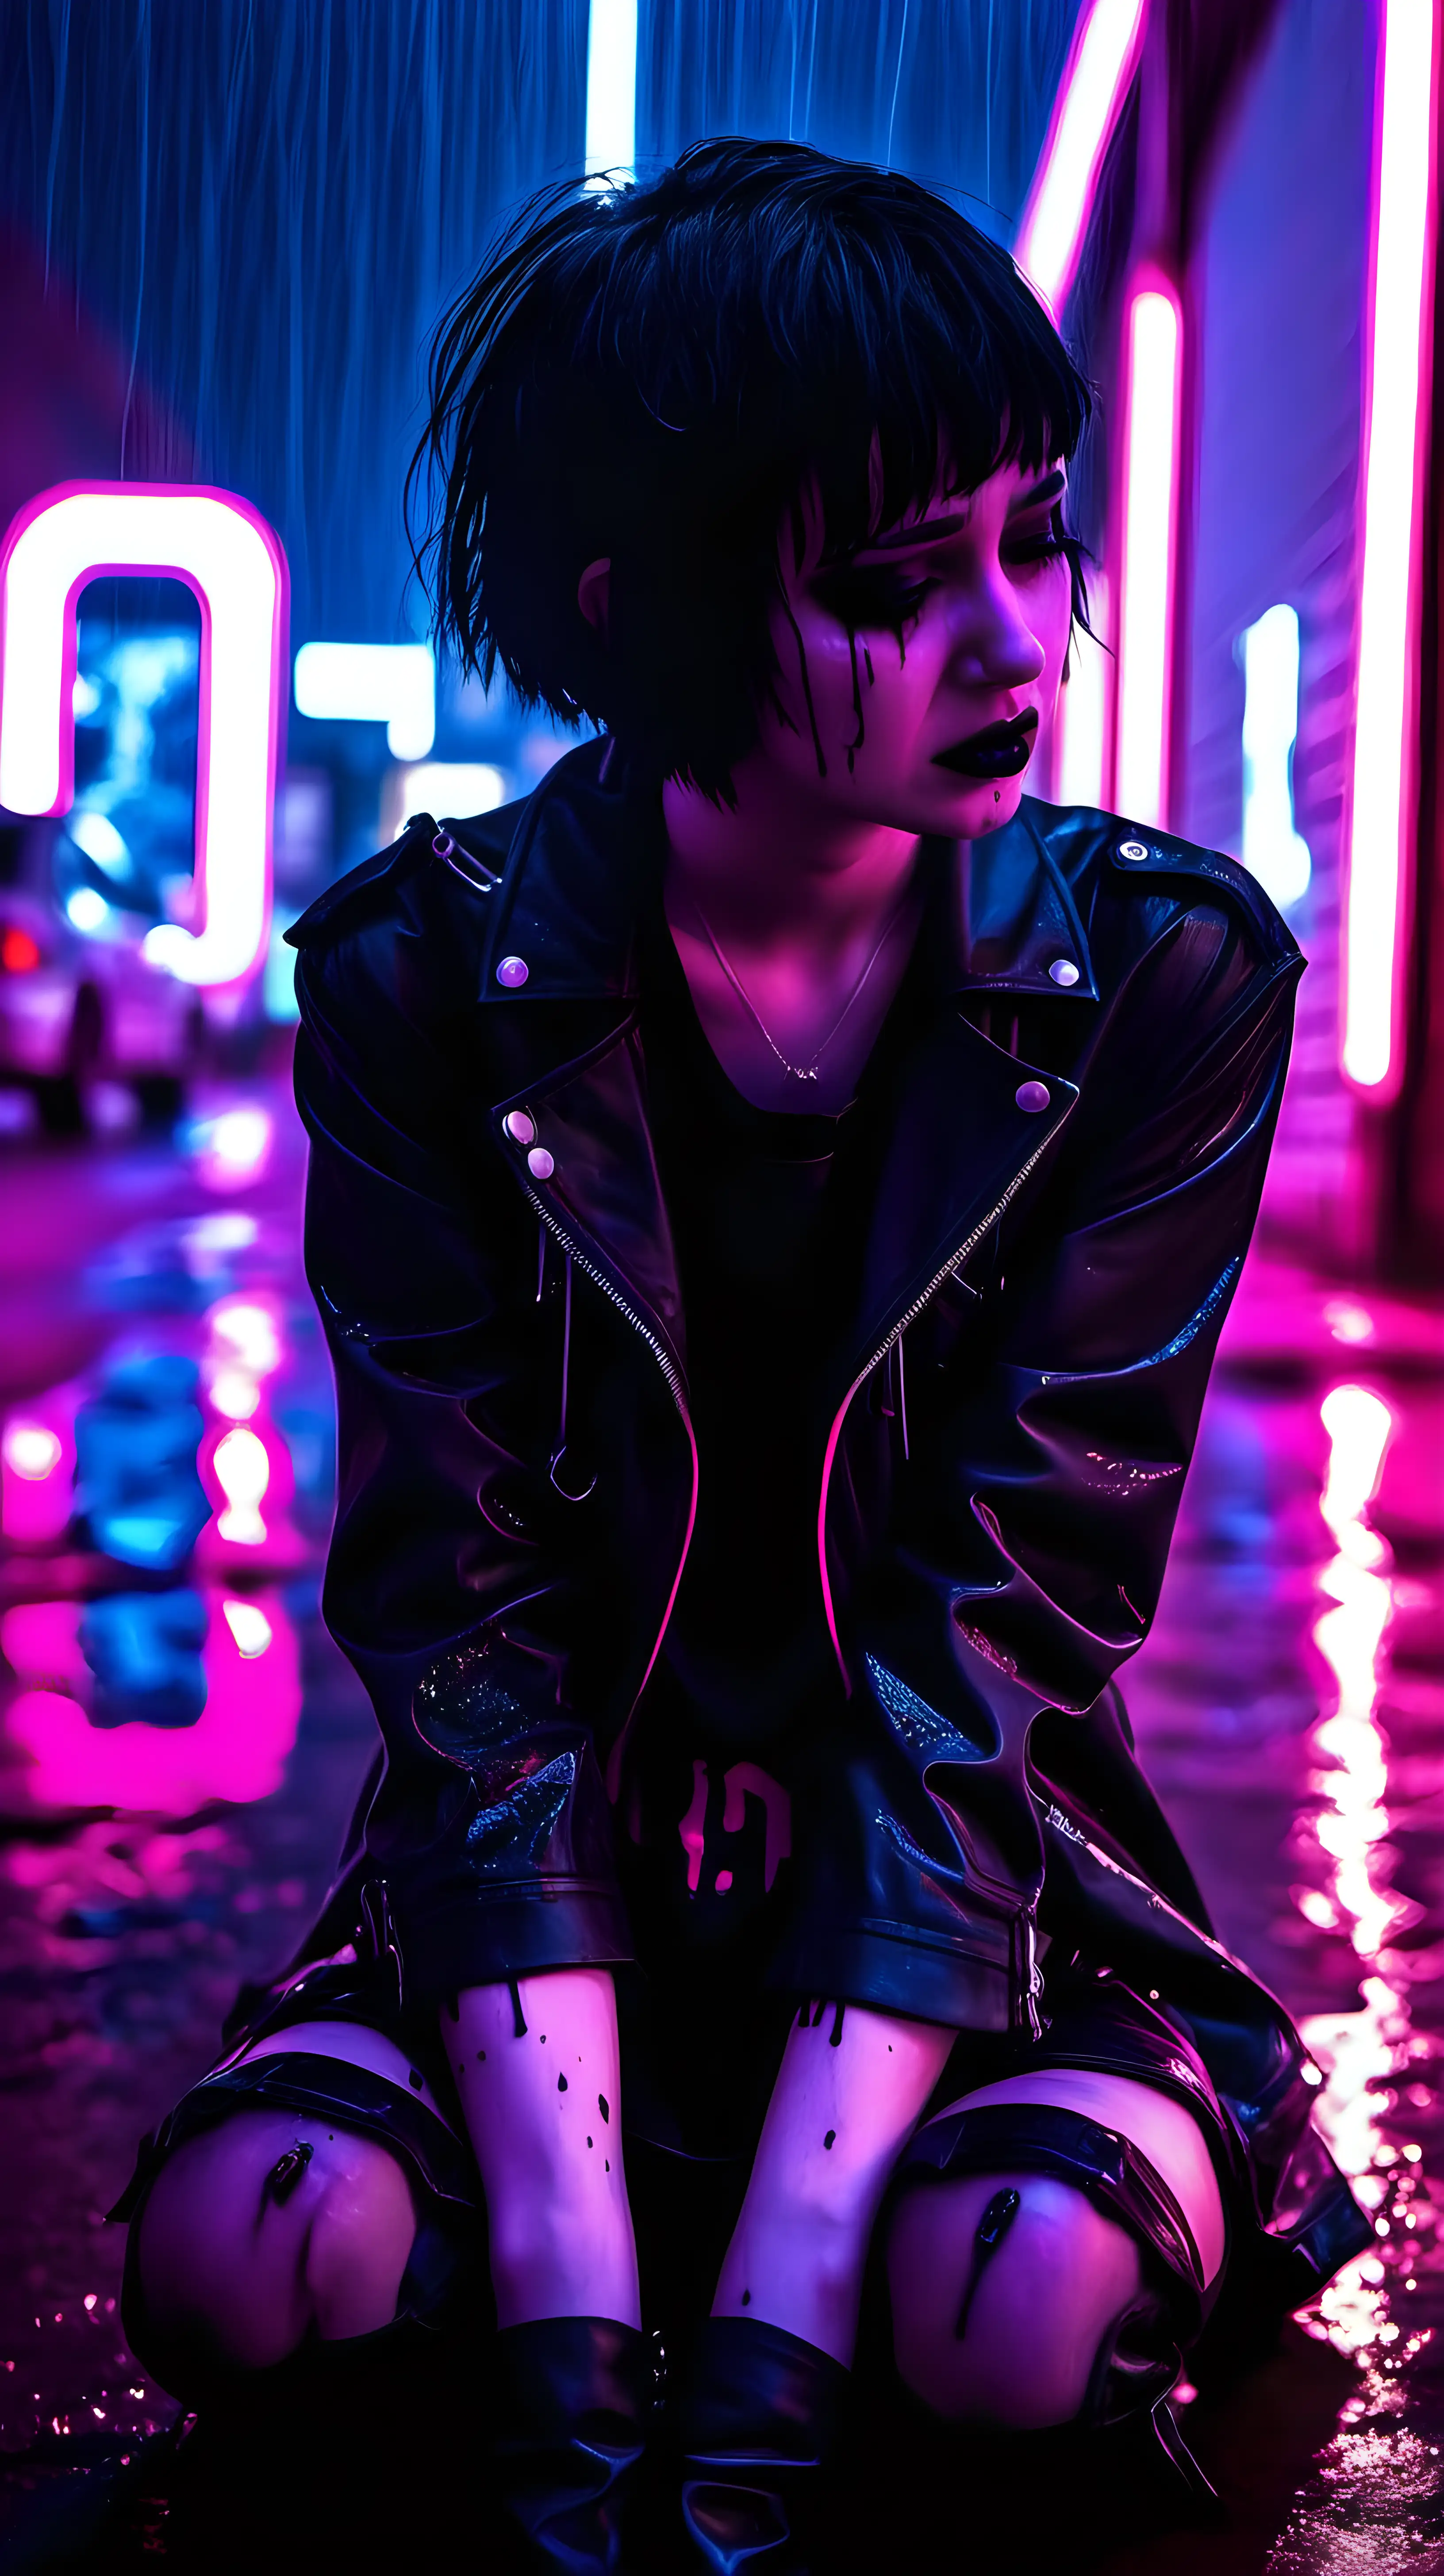 Goth Girl with Short Hair in the Rain under Pink Neon Lights